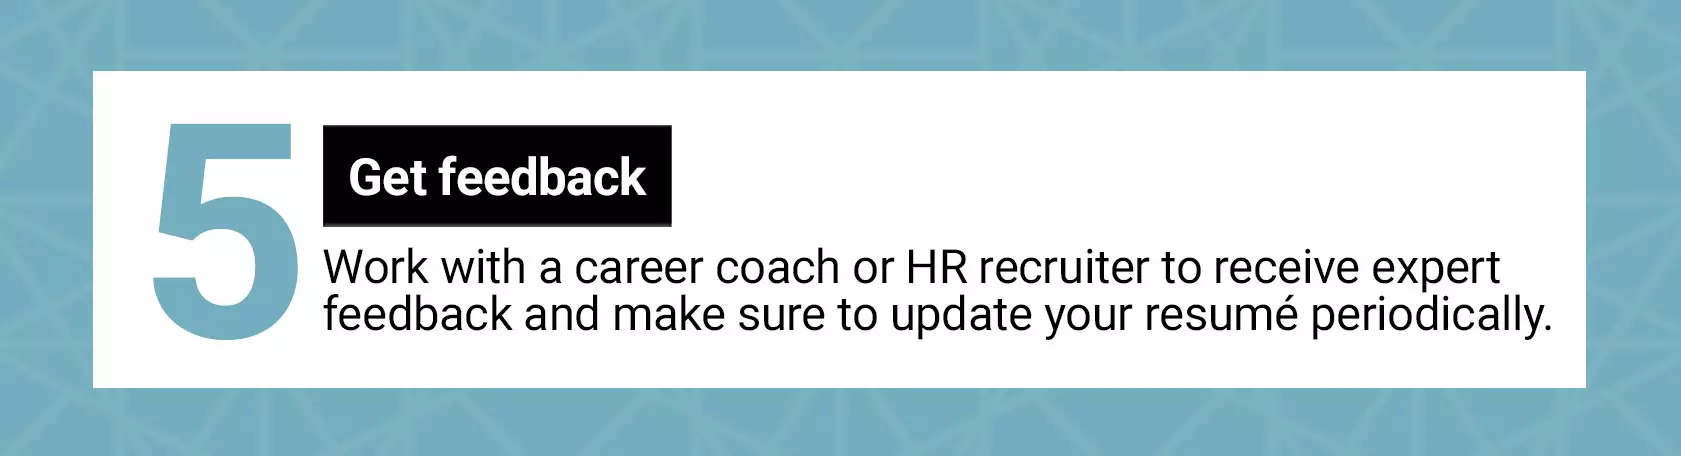 5. Get feedback. Work with a career coach or HR recruiter to receive expert feedback and make sure to update your resume periodically.